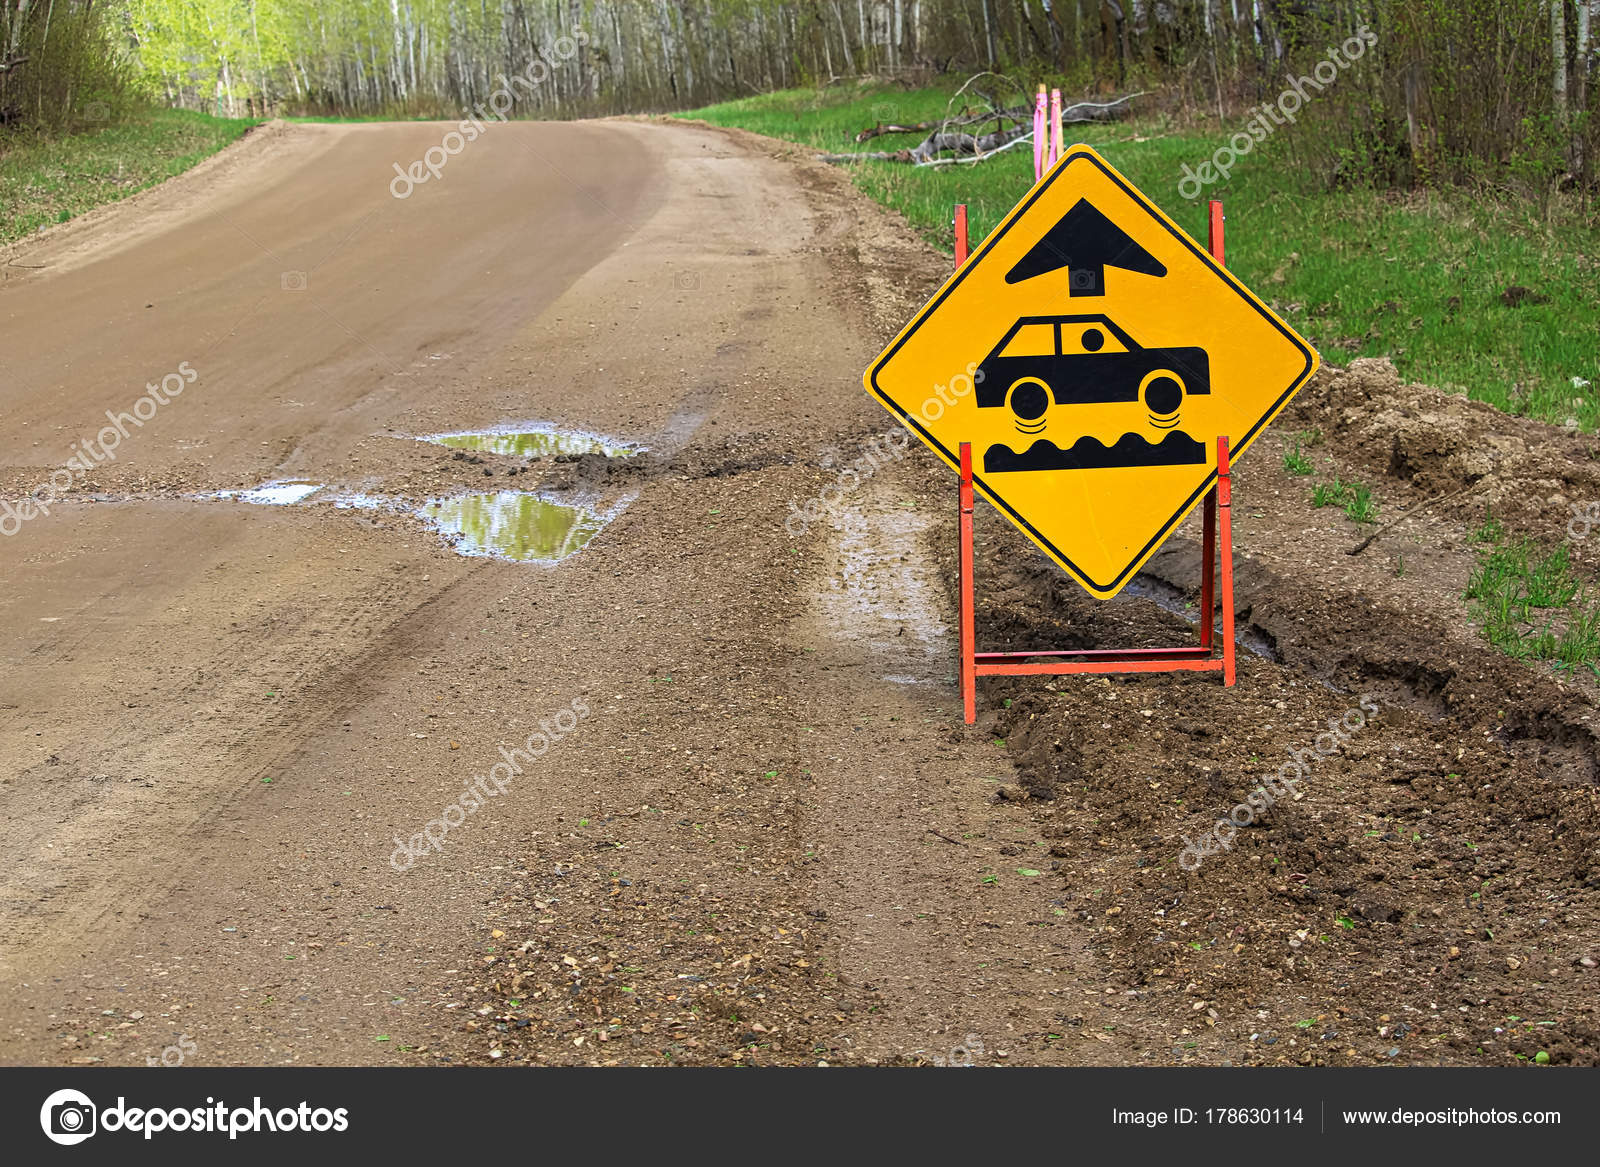 Images Bumpy Road Ahead A Bumpy Road Ahead Sign With A Large Pothole Stock Photo C Akchamczuk